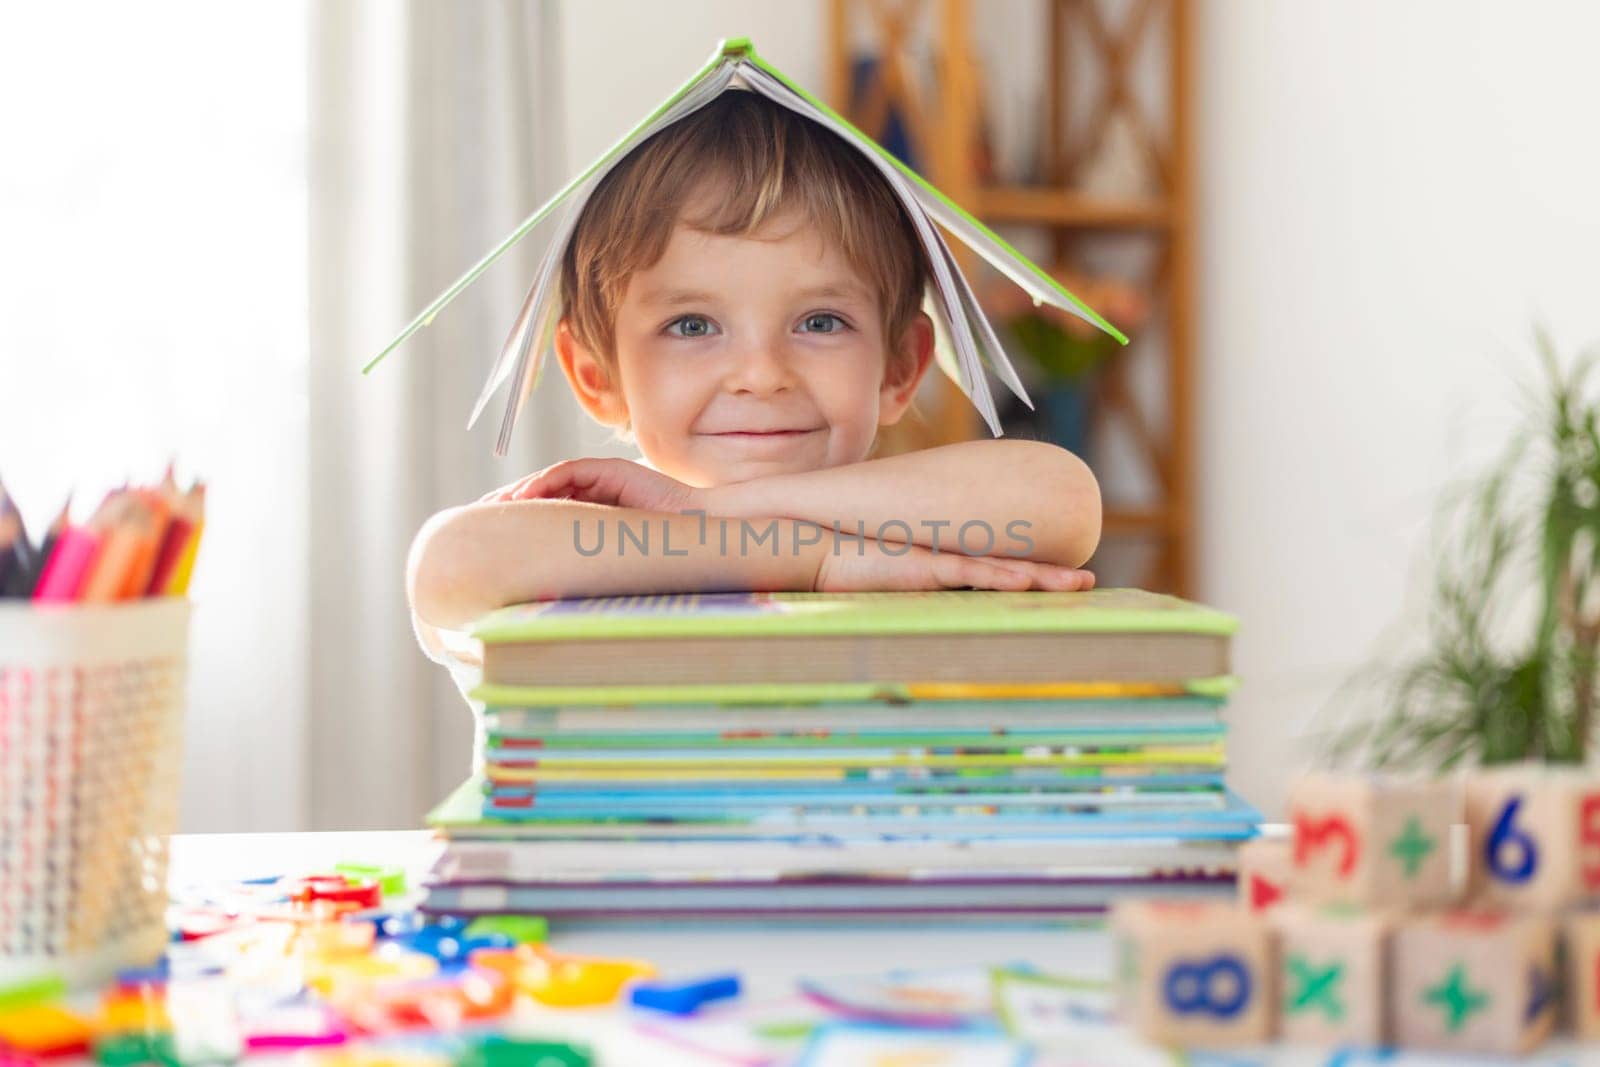 Cheerful boy with stack of books under paper roof. Joyful learning concept. Creative education and imagination theme. Design for educational poster, invitation to reading event, book club flyer.